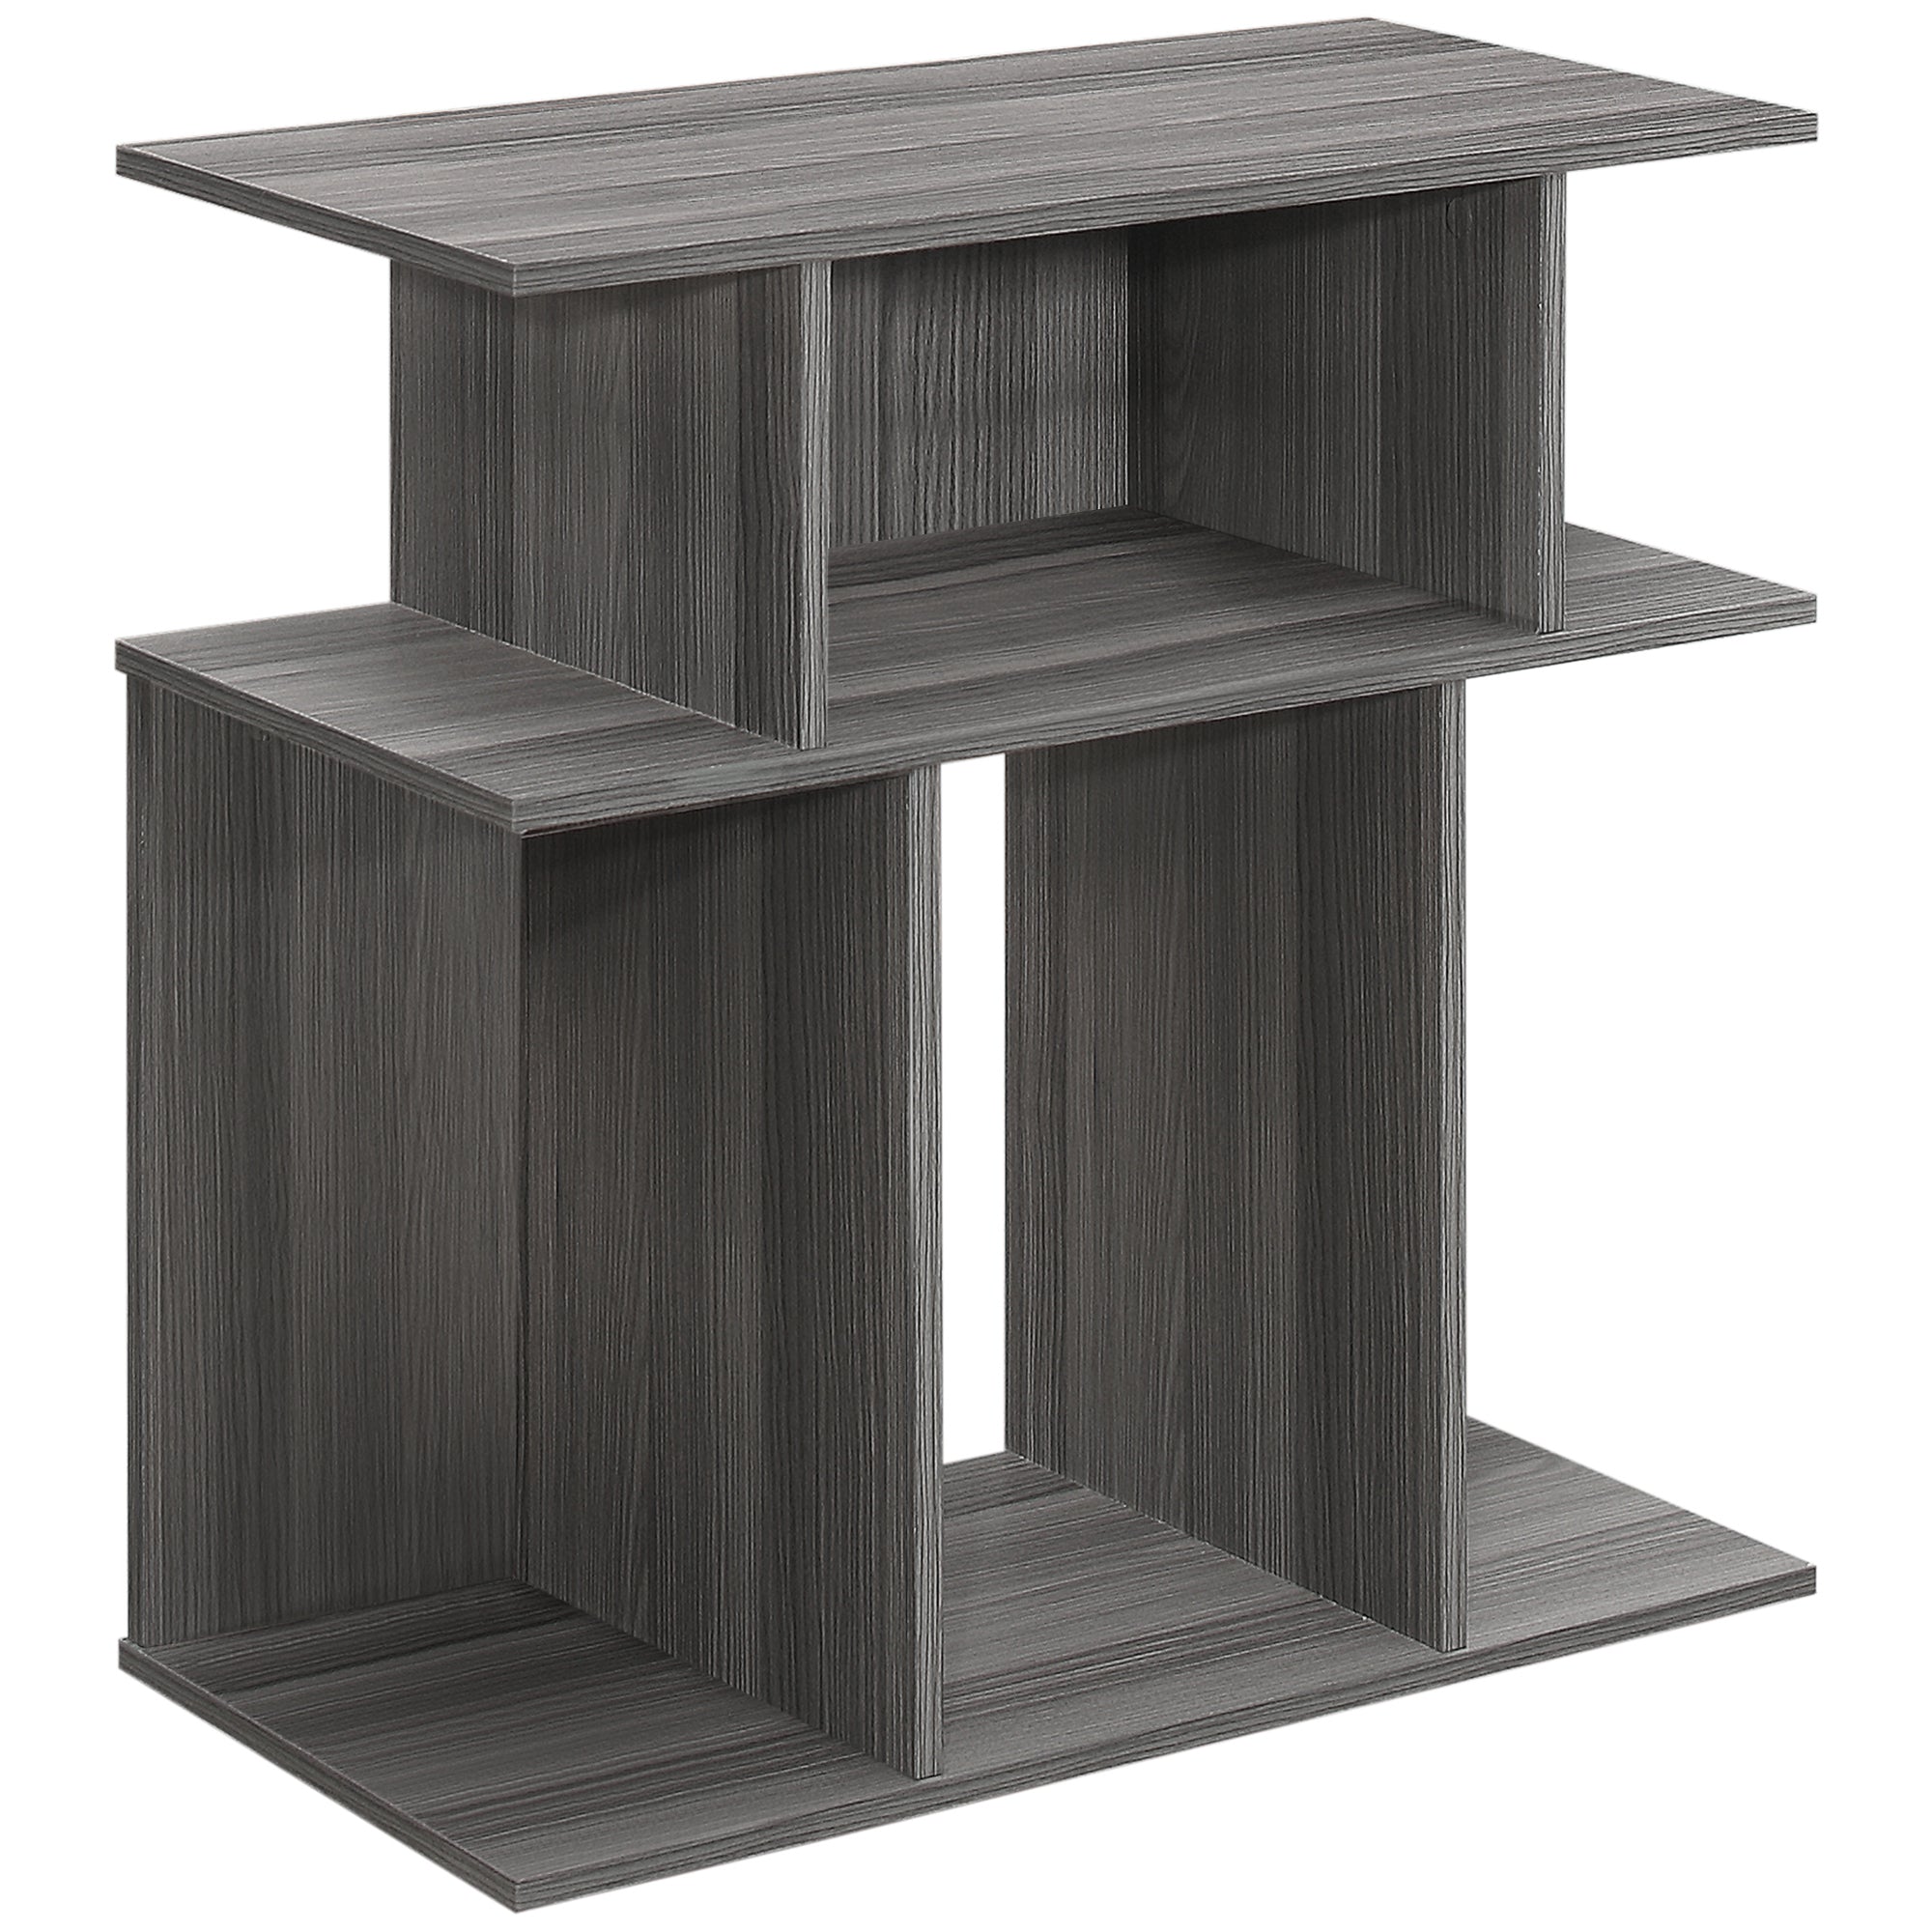 MN-412481    Accent Table, Side, End, Nightstand, Lamp, Living Room, Bedroom, Laminate, Grey, Contemporary, Modern